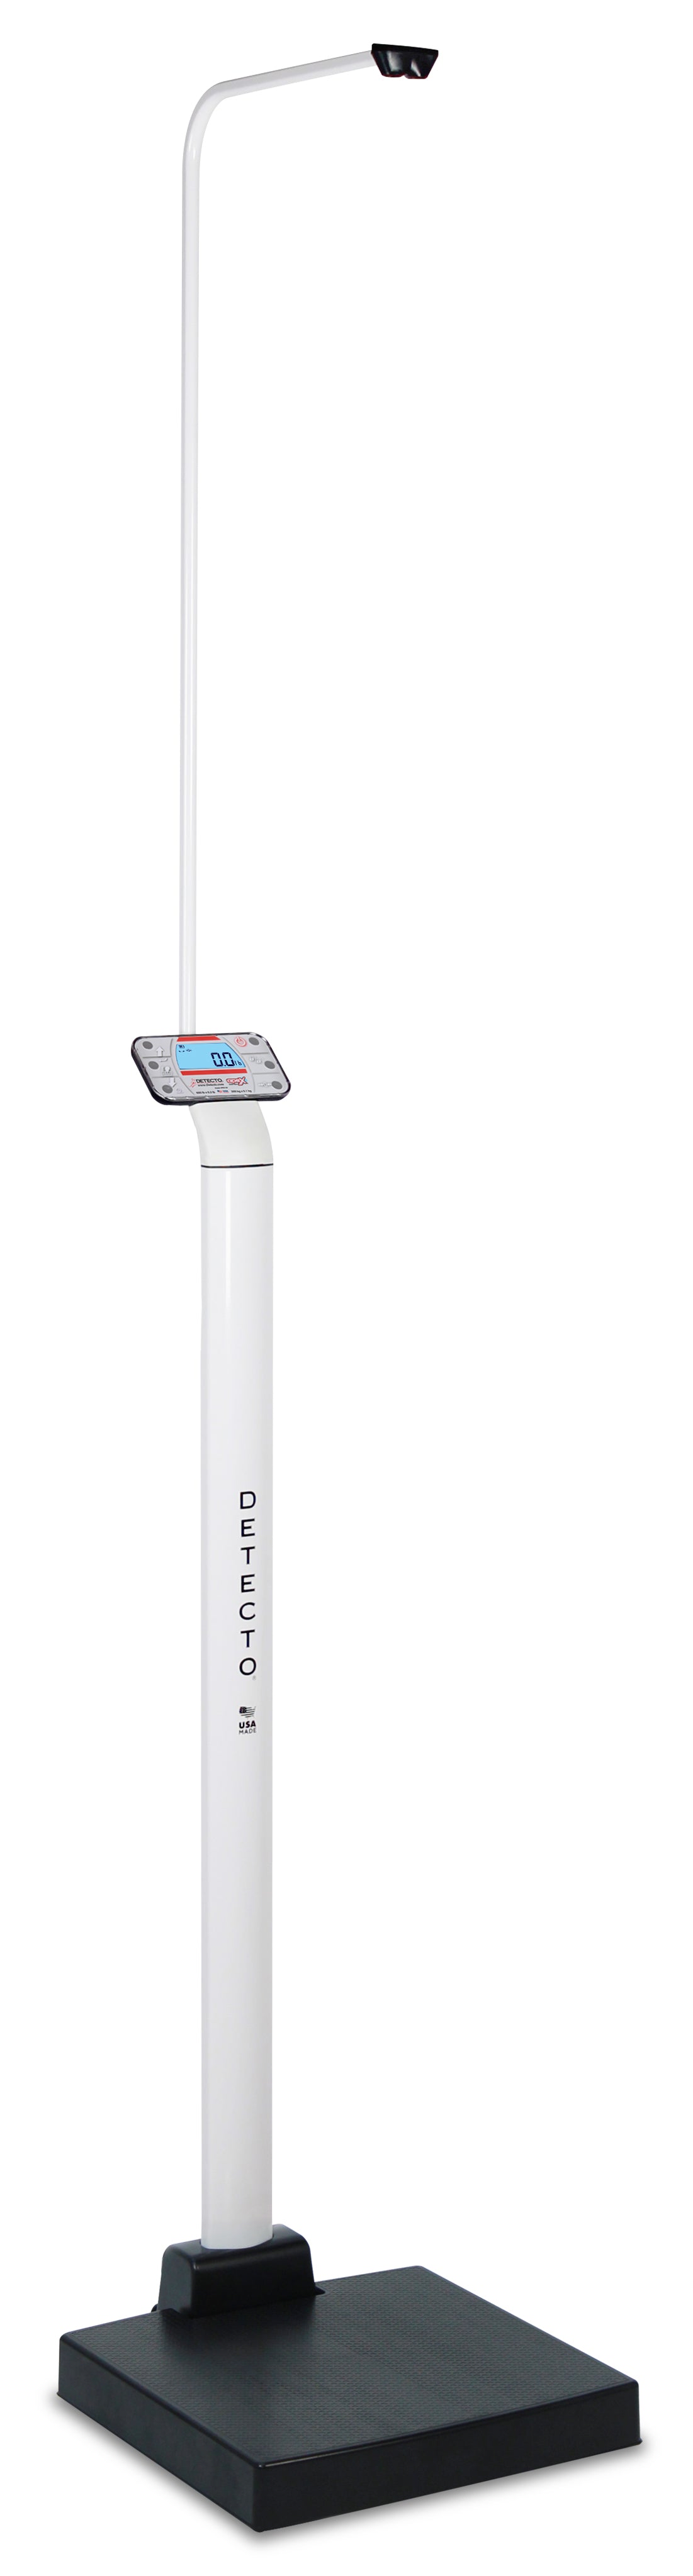 Detecto Apex-SH-C-AC Digital Clinical Scale with Sonar Height Rods 600lb x 0.2lb / 300kg x 0.1kg, BT/WiFi, AC Adapter